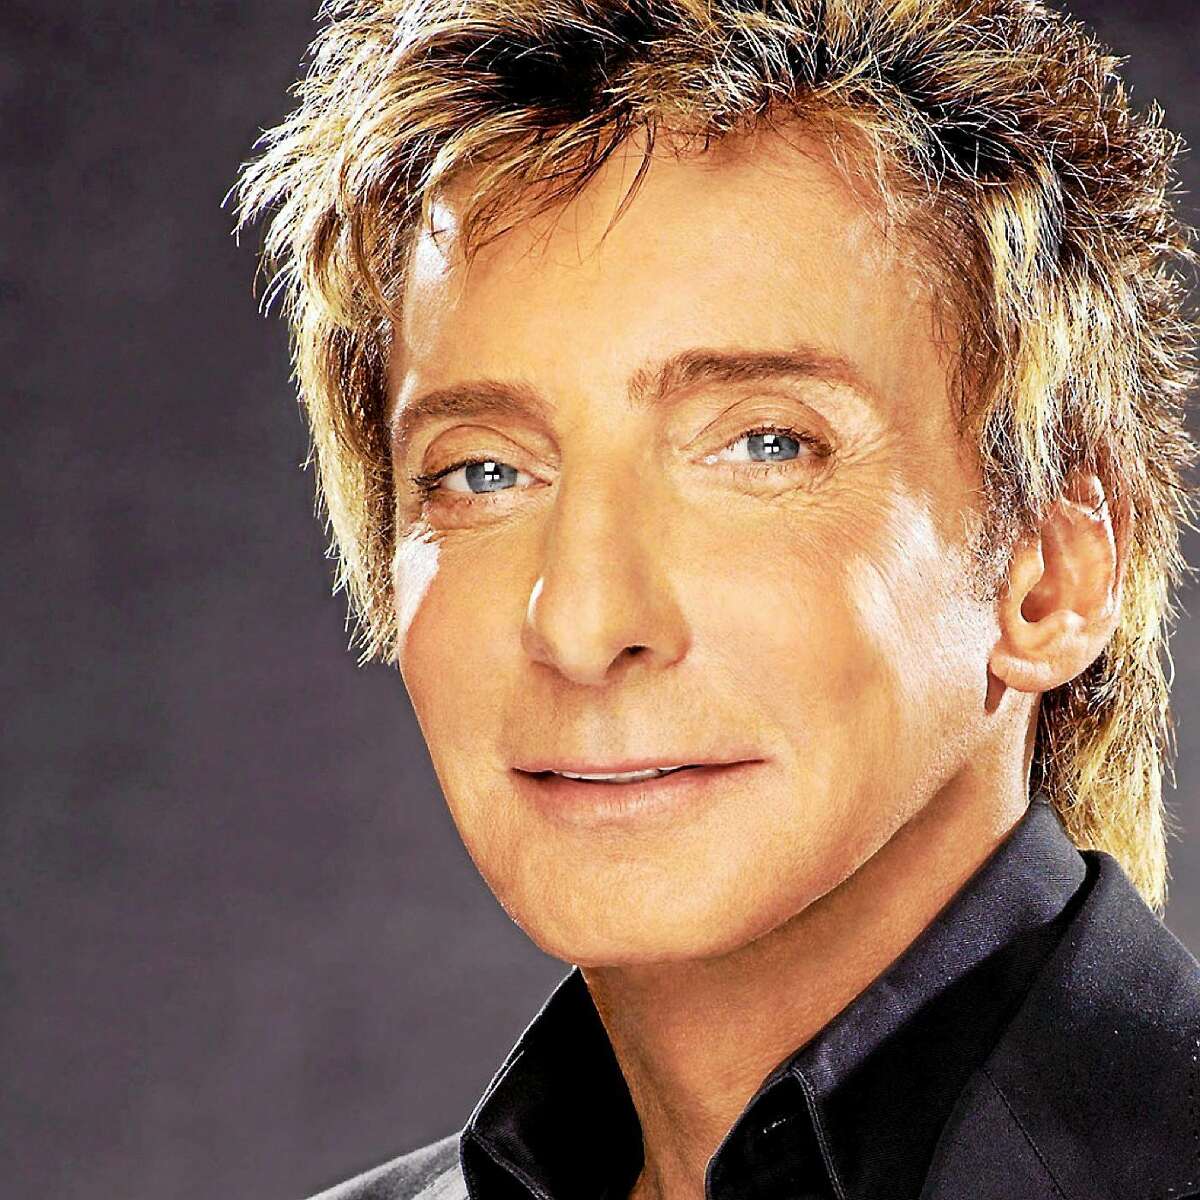 Contributed photo Singer and songwriter Barry Manilow is set to perform at Foxwoods Resort & Casino on Saturday, March 28. The music legend is currently on his multiple city ìOne Last Timeî tour. A Songwriters Hall of Fame inductee, Manilow has triumphed in every medium of entertainment. With worldwide record sales exceeding 80 million, he has ranked as the top Adult Contemporary chart artist of all time with more than 50 Top 40 hits. The opening act is saxophonist Dave Koz. For tickets or more information on this upcoming show, call the Foxwoods box office at 800-200-2882.